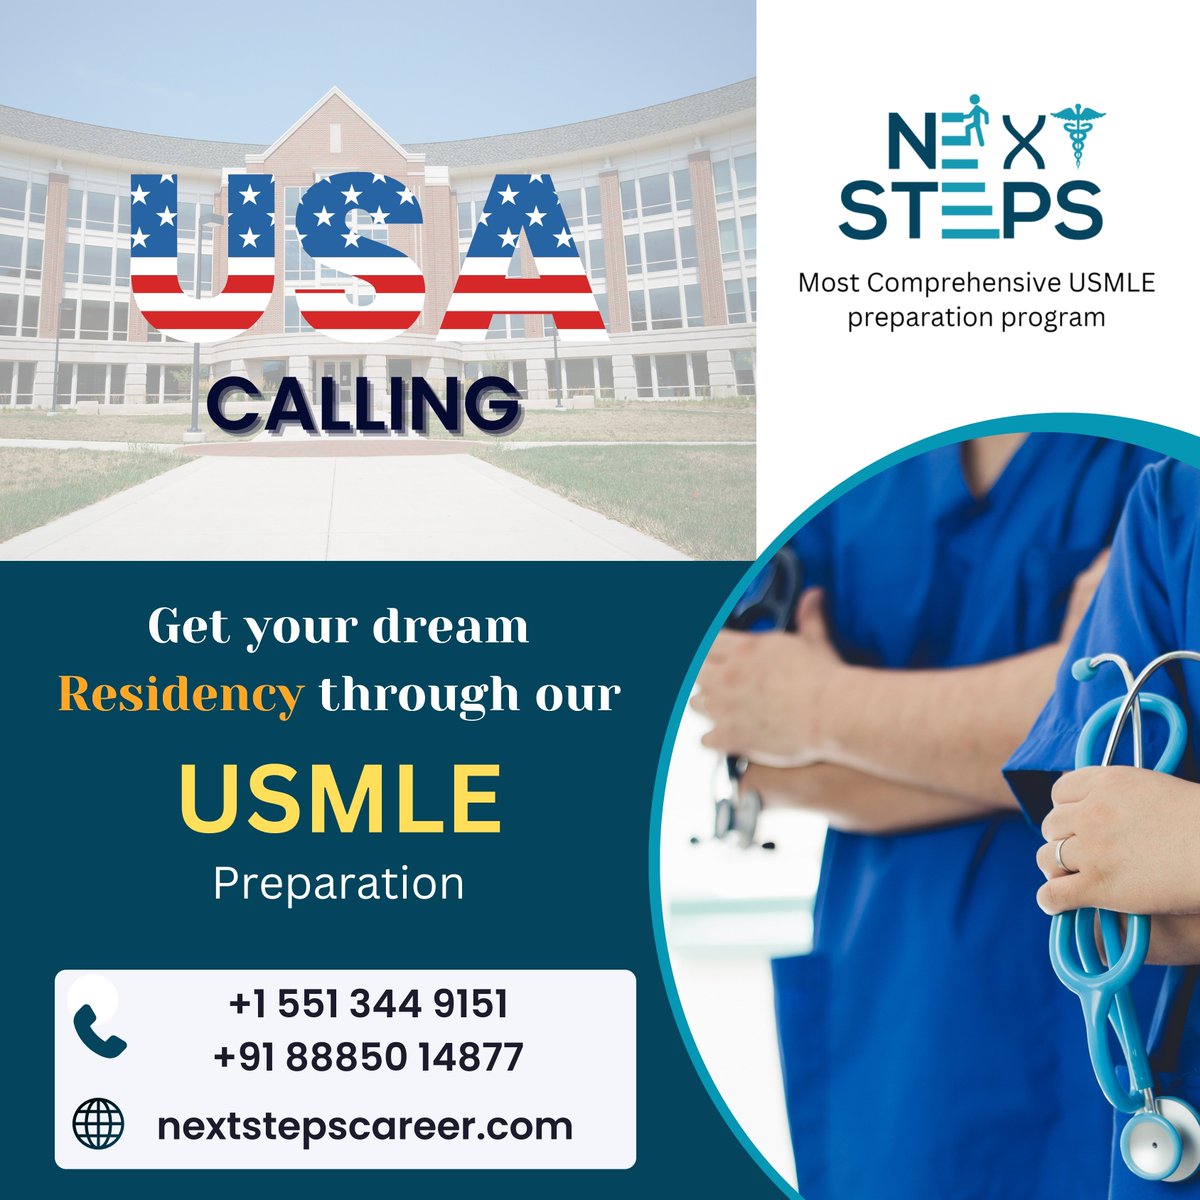 Your dream residency awaits! 🌟 Prepare for success with our USMLE program and answer the call to your future in the USA. 
Enroll Now: nextstepscareer.com/enroll-now/

#USMLE #Residency #residencymatch #usmlematch #match #nextsteps #nextstepsusmle #DreamBig